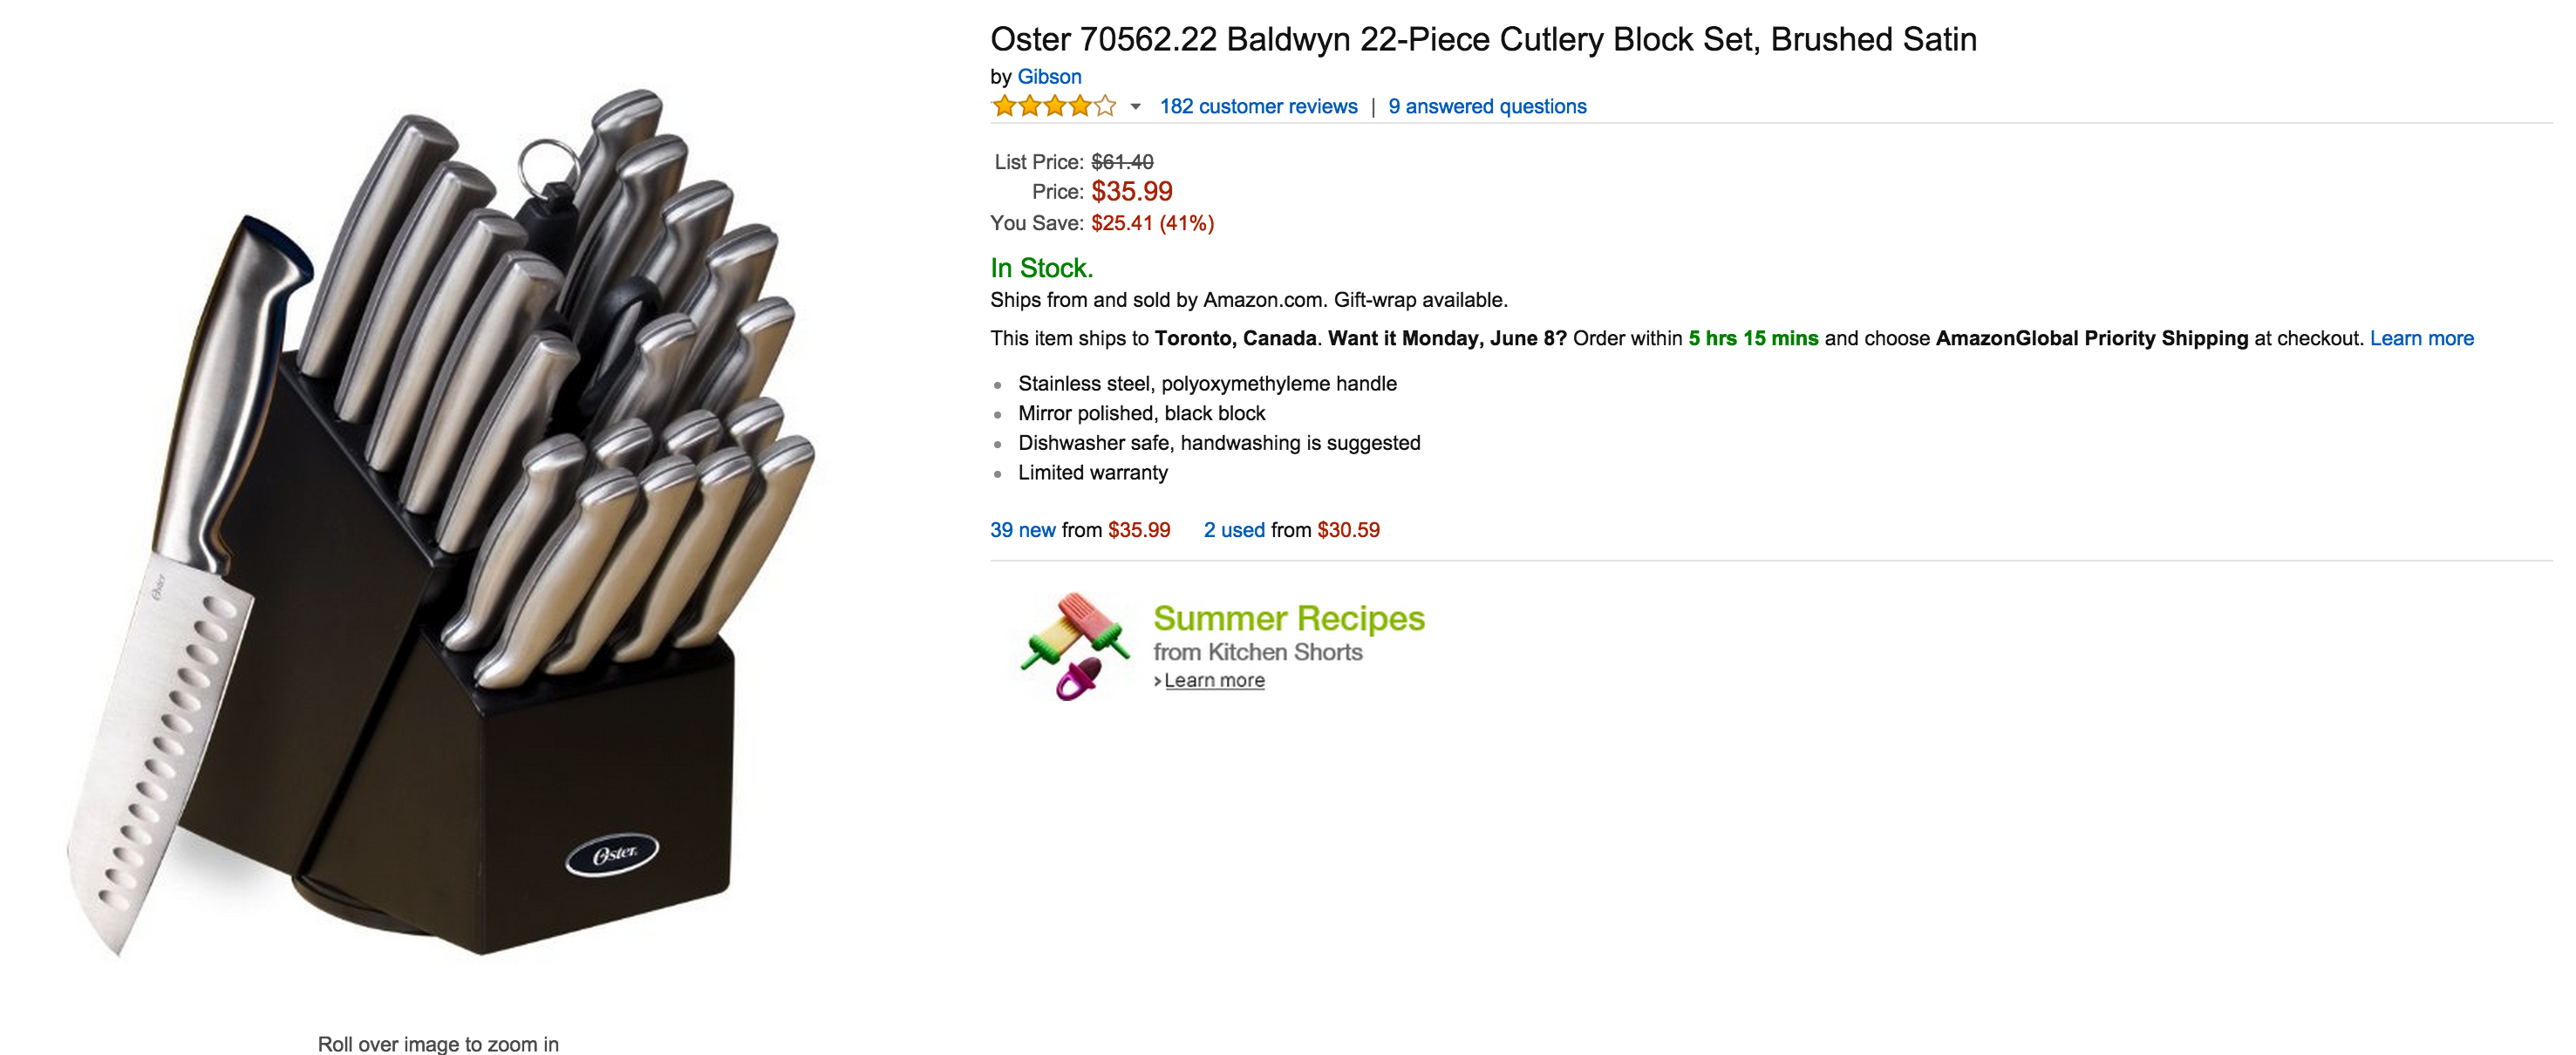 https://9to5toys.com/wp-content/uploads/sites/5/2015/06/oster-baldwyn-22-piece-cutlery-block-set-in-brushed-satin-70562-22-sale-02.png